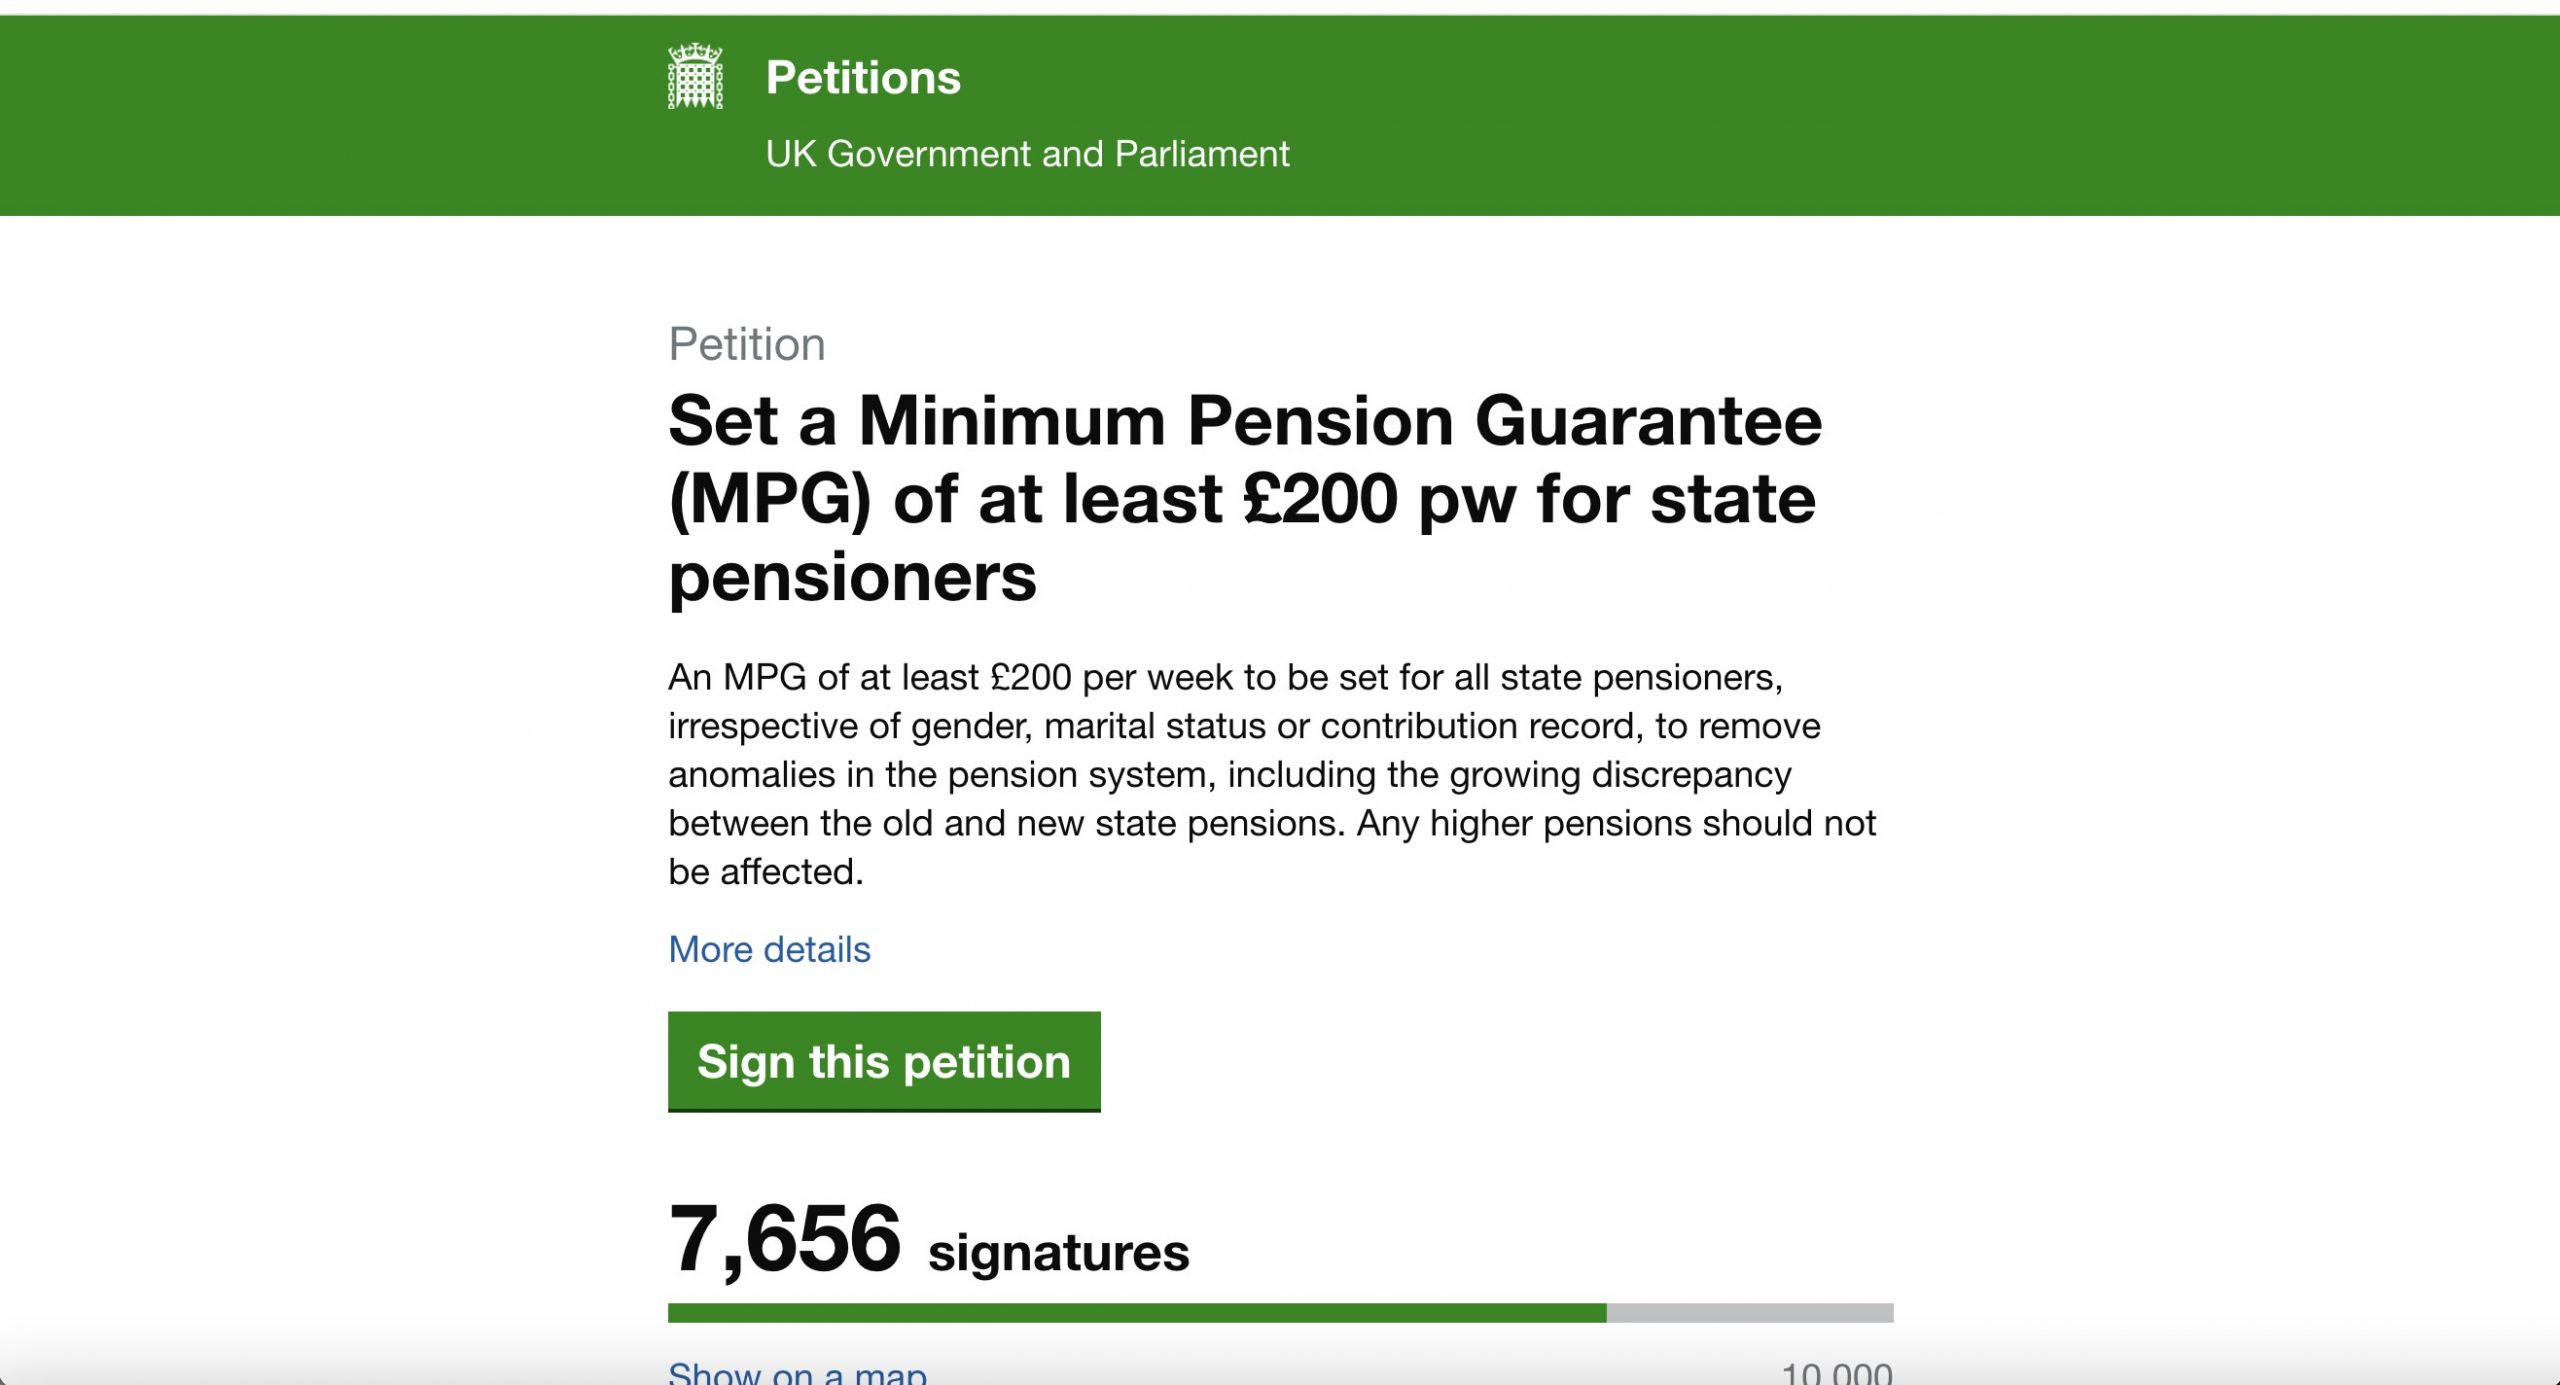 Please click above and sign the petition, NOW!